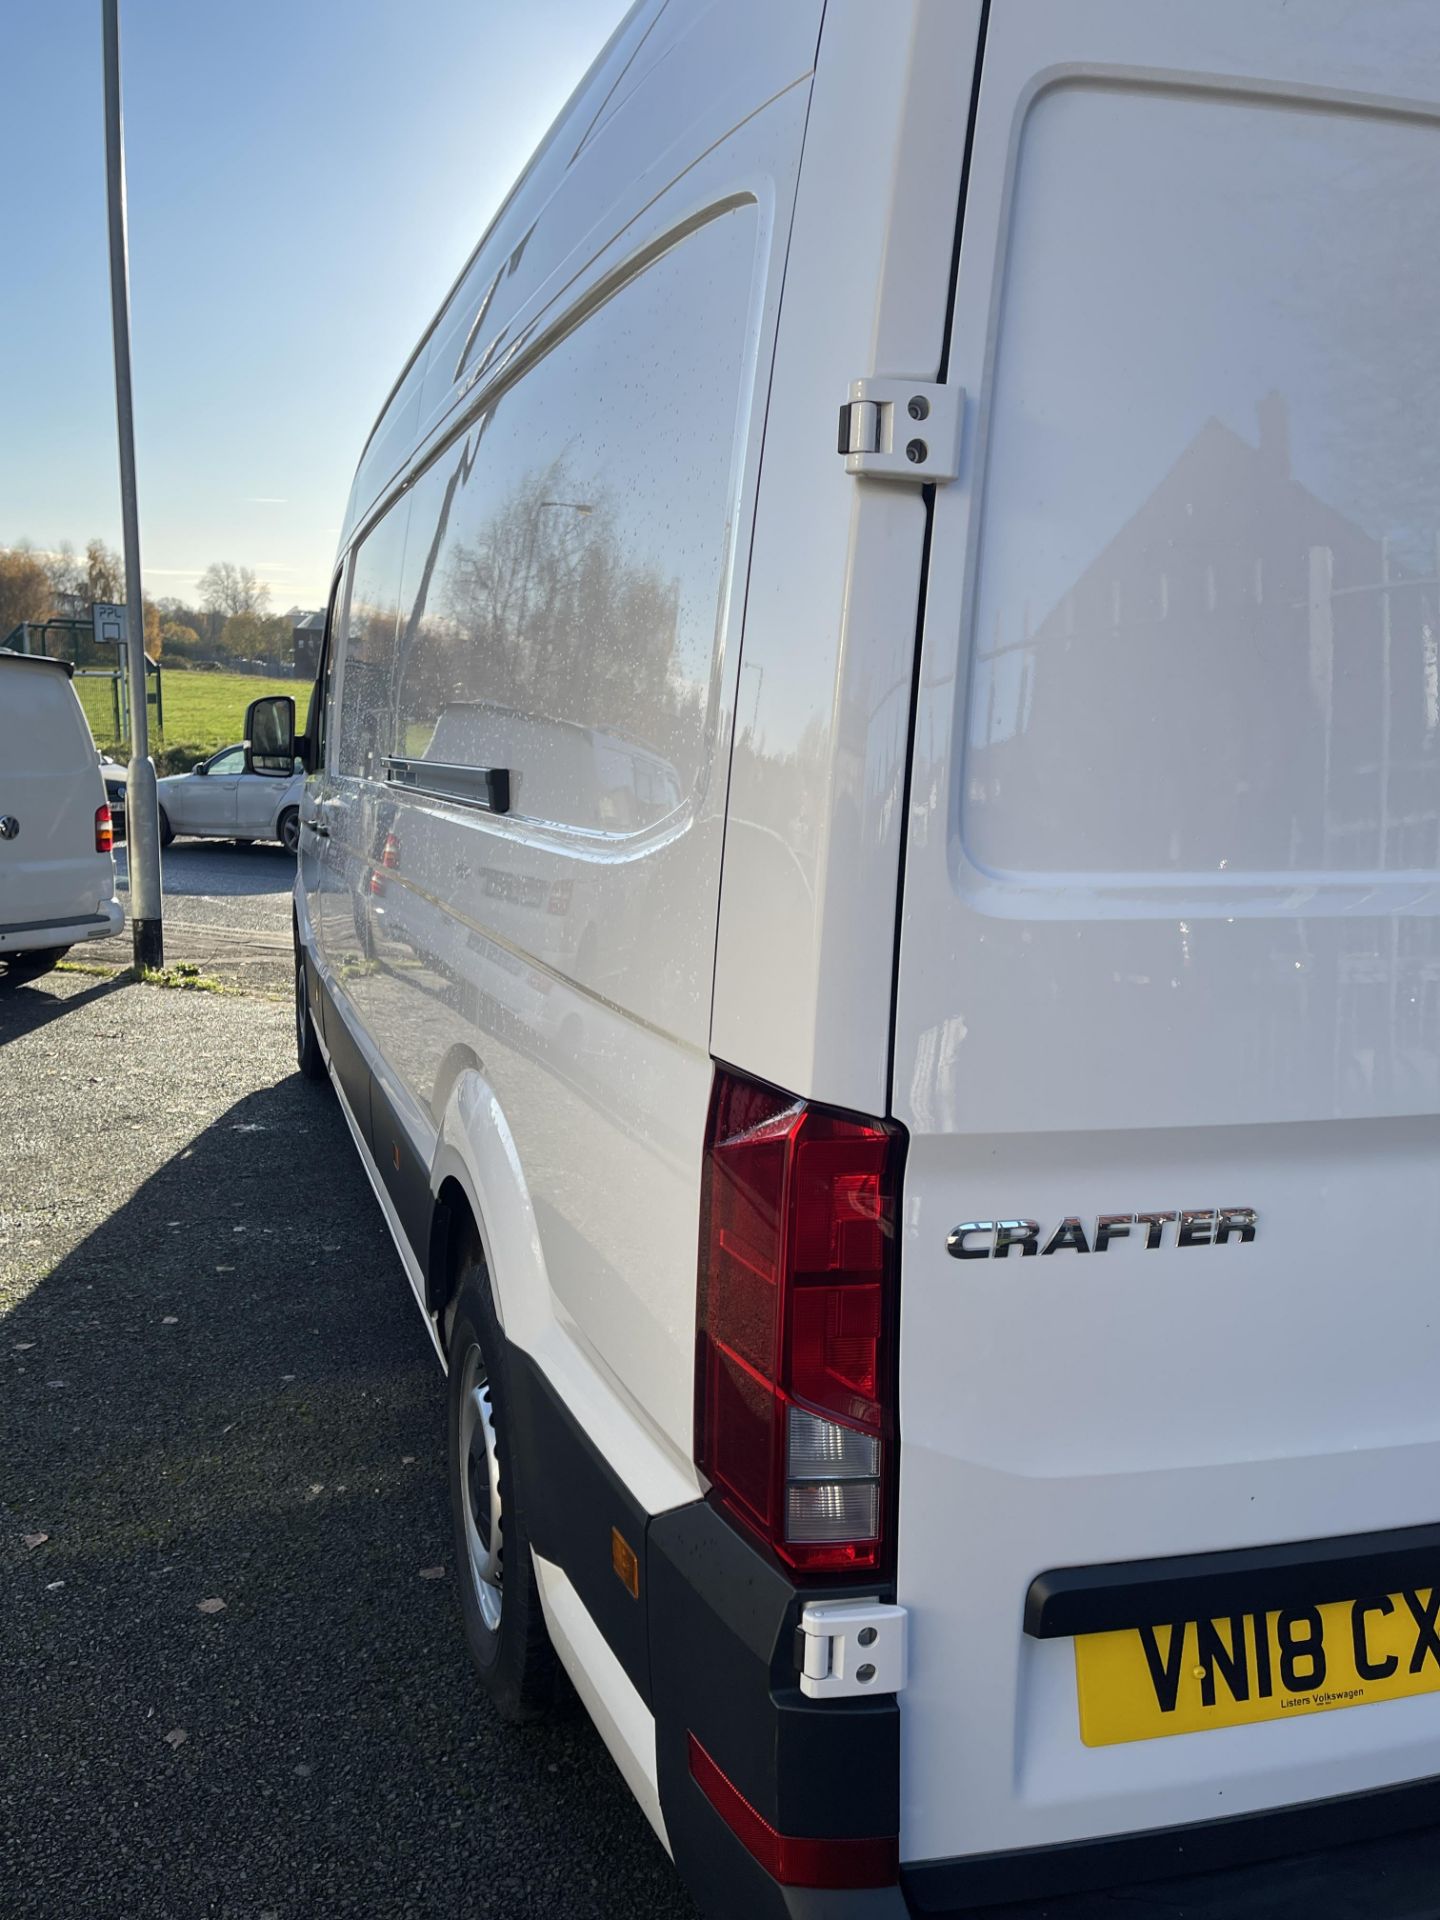 2018 - VW Crafter CR35 102PS Trend Line LWB TDI - Image 12 of 34